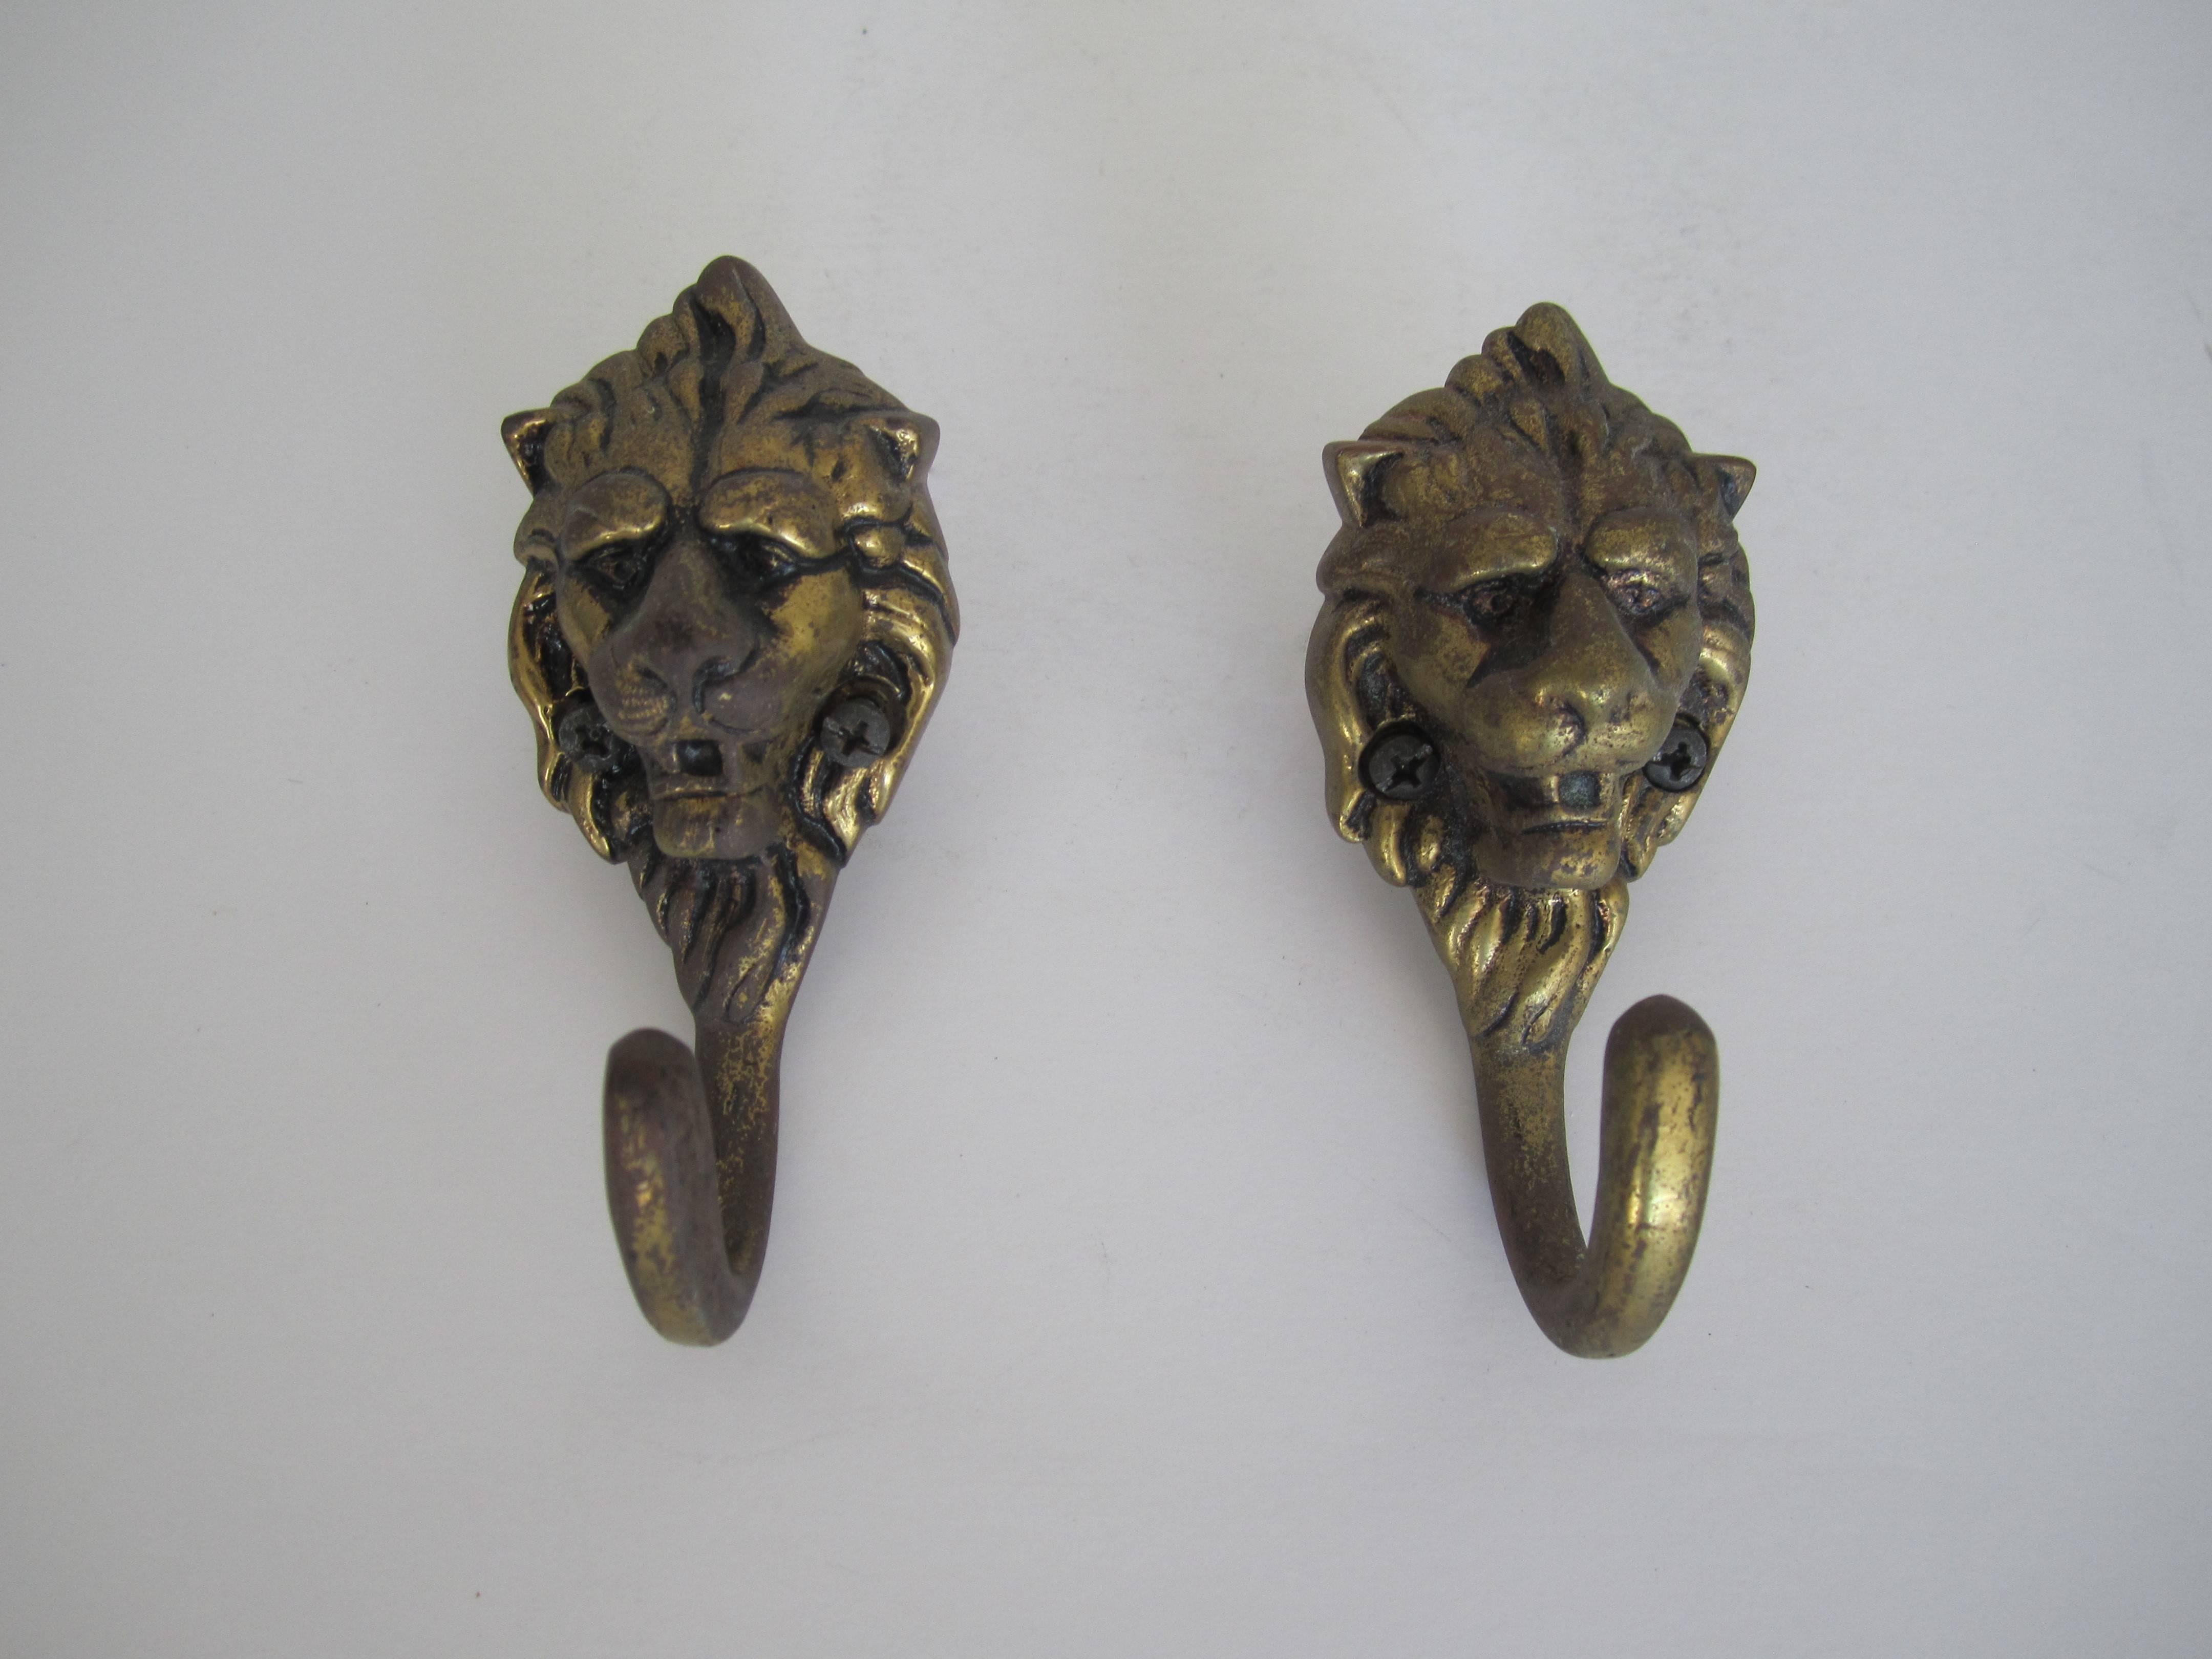 A vintage pair of European brass lion head hardware wall hooks.
Pair available here online. By request, pair can be made available by appointment to the Trade (in New York).

Alternatively, by request, pair can be made available for viewing in my